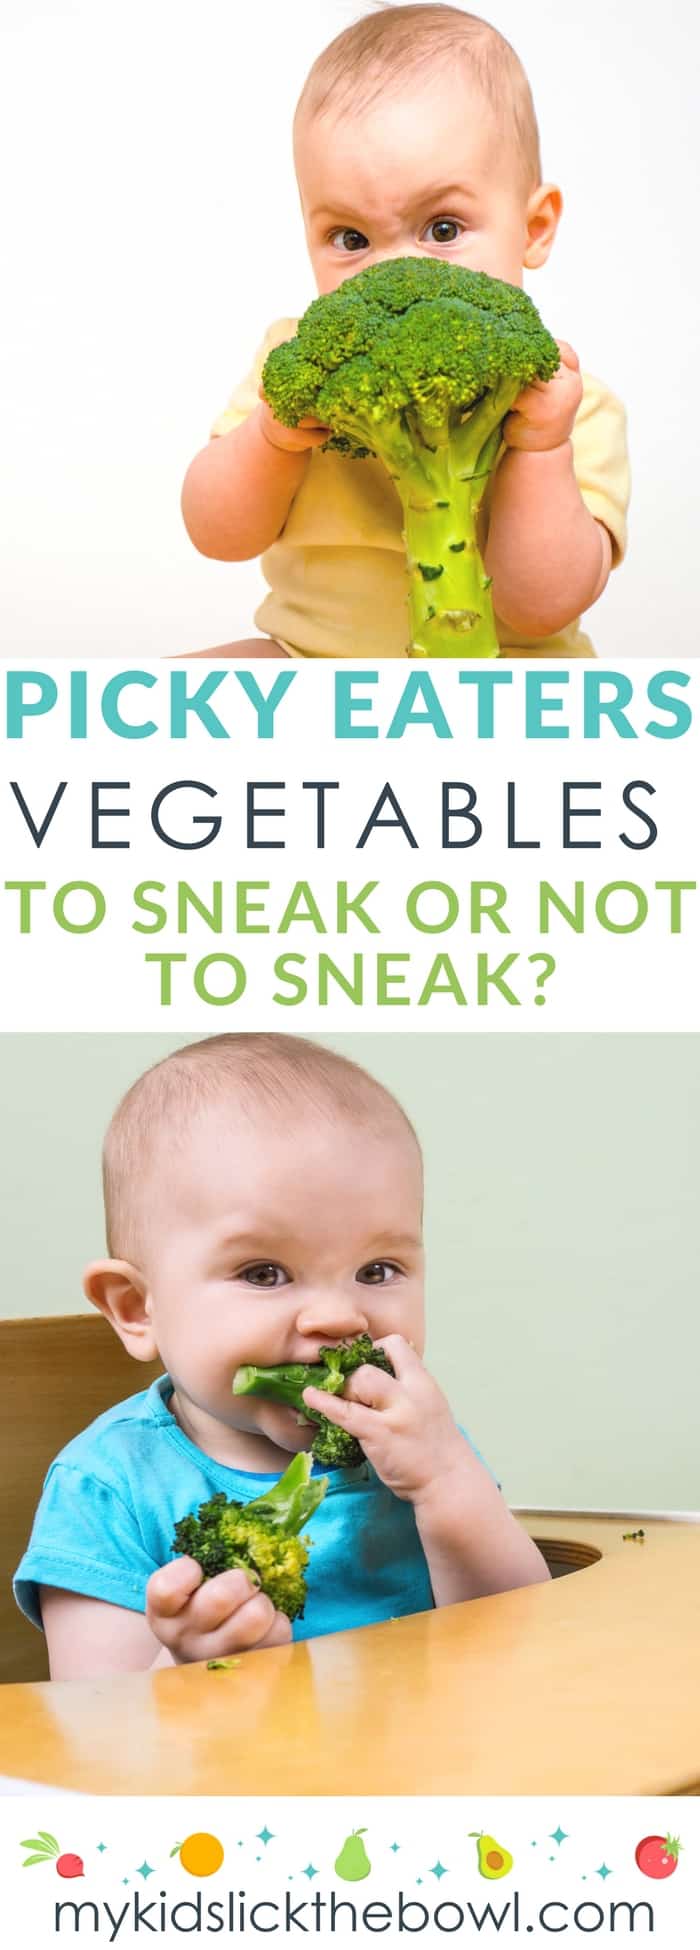 Getting kids to eat vegetables: To sneak or not to sneak? That is the ...